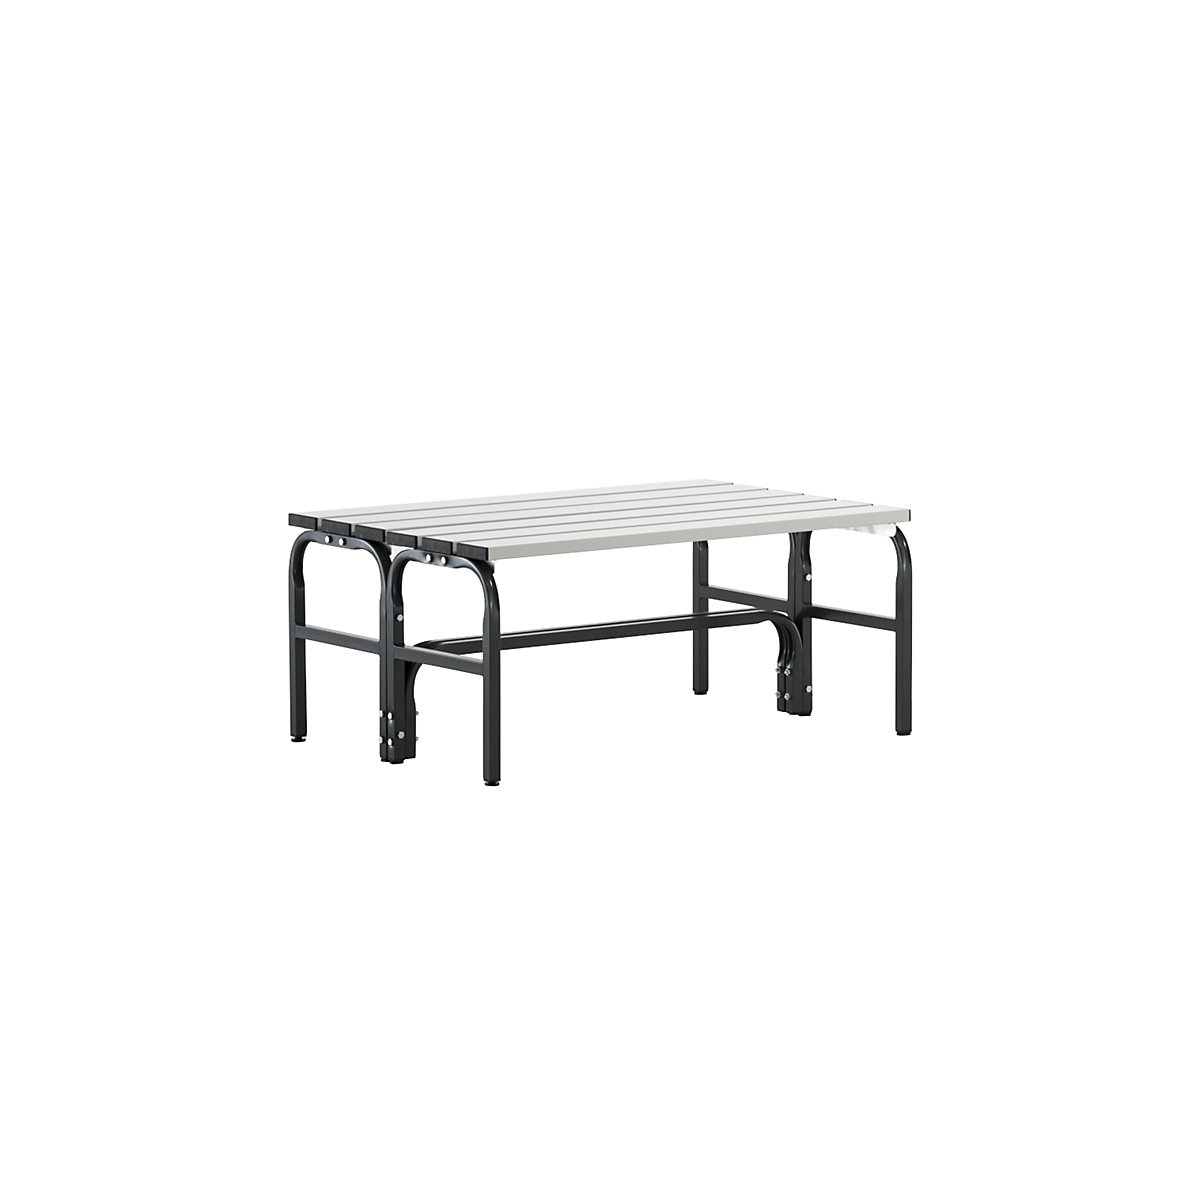 Sypro – Cloakroom bench, double sided